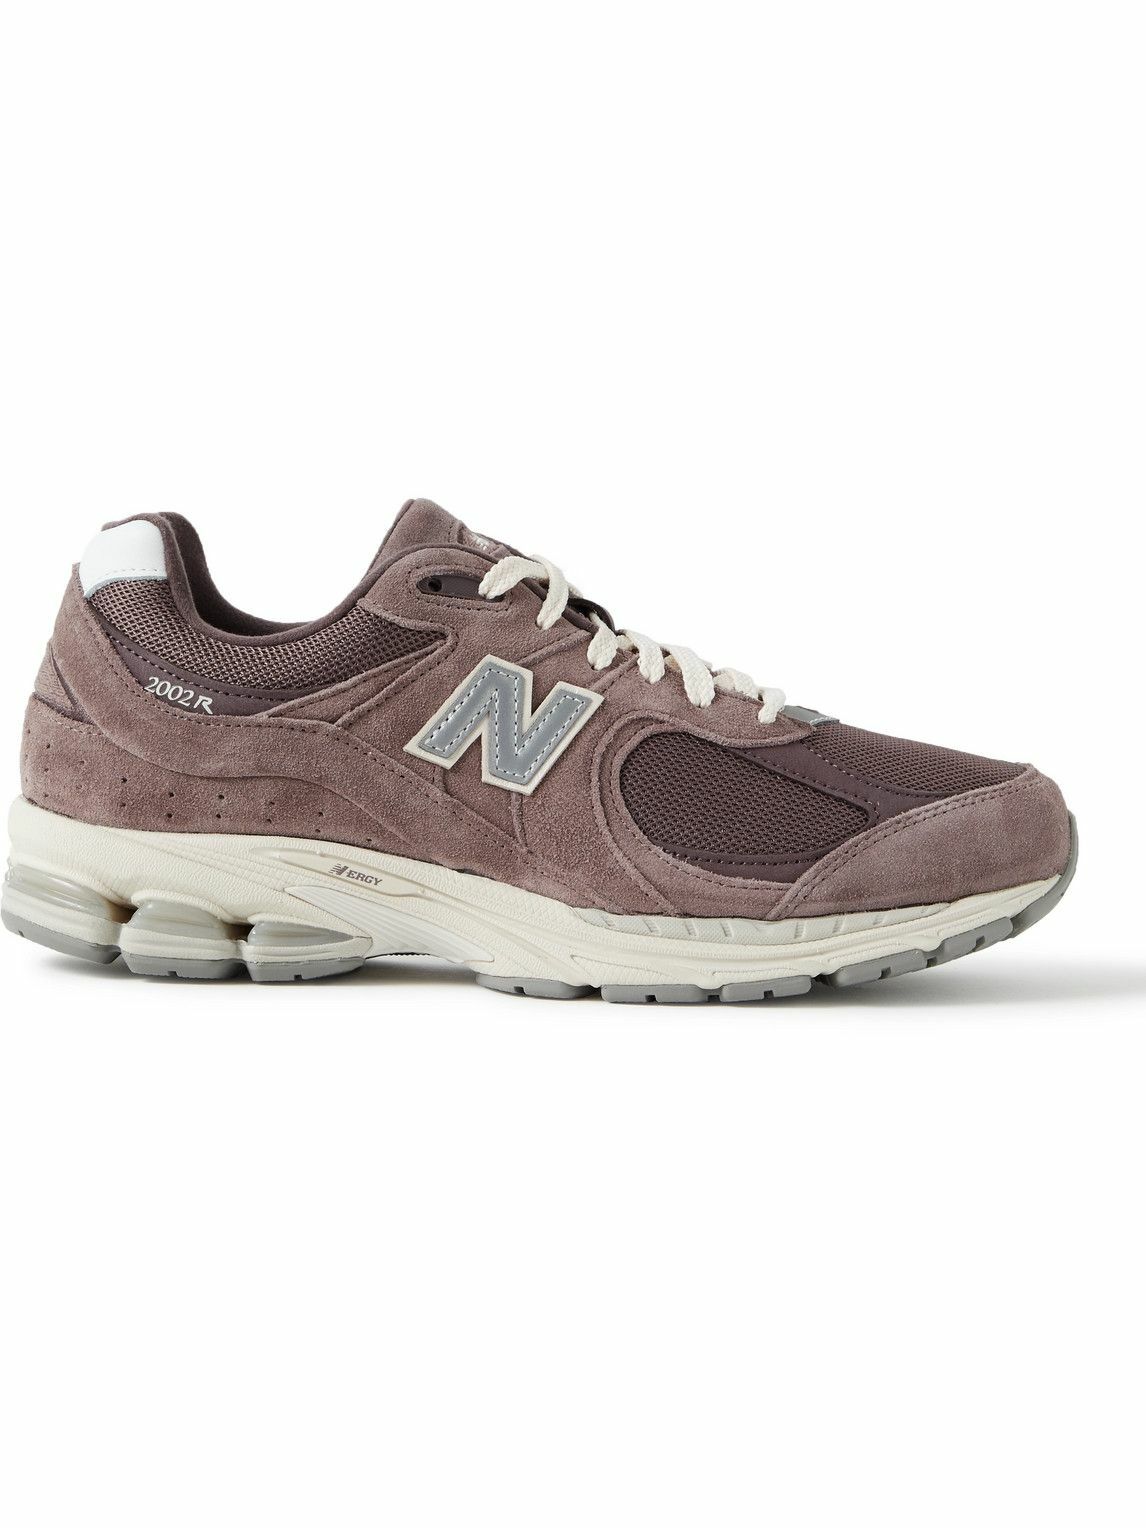 New Balance - 2002R Leather-Trimmed Nubuck and Mesh Sneakers - Brown